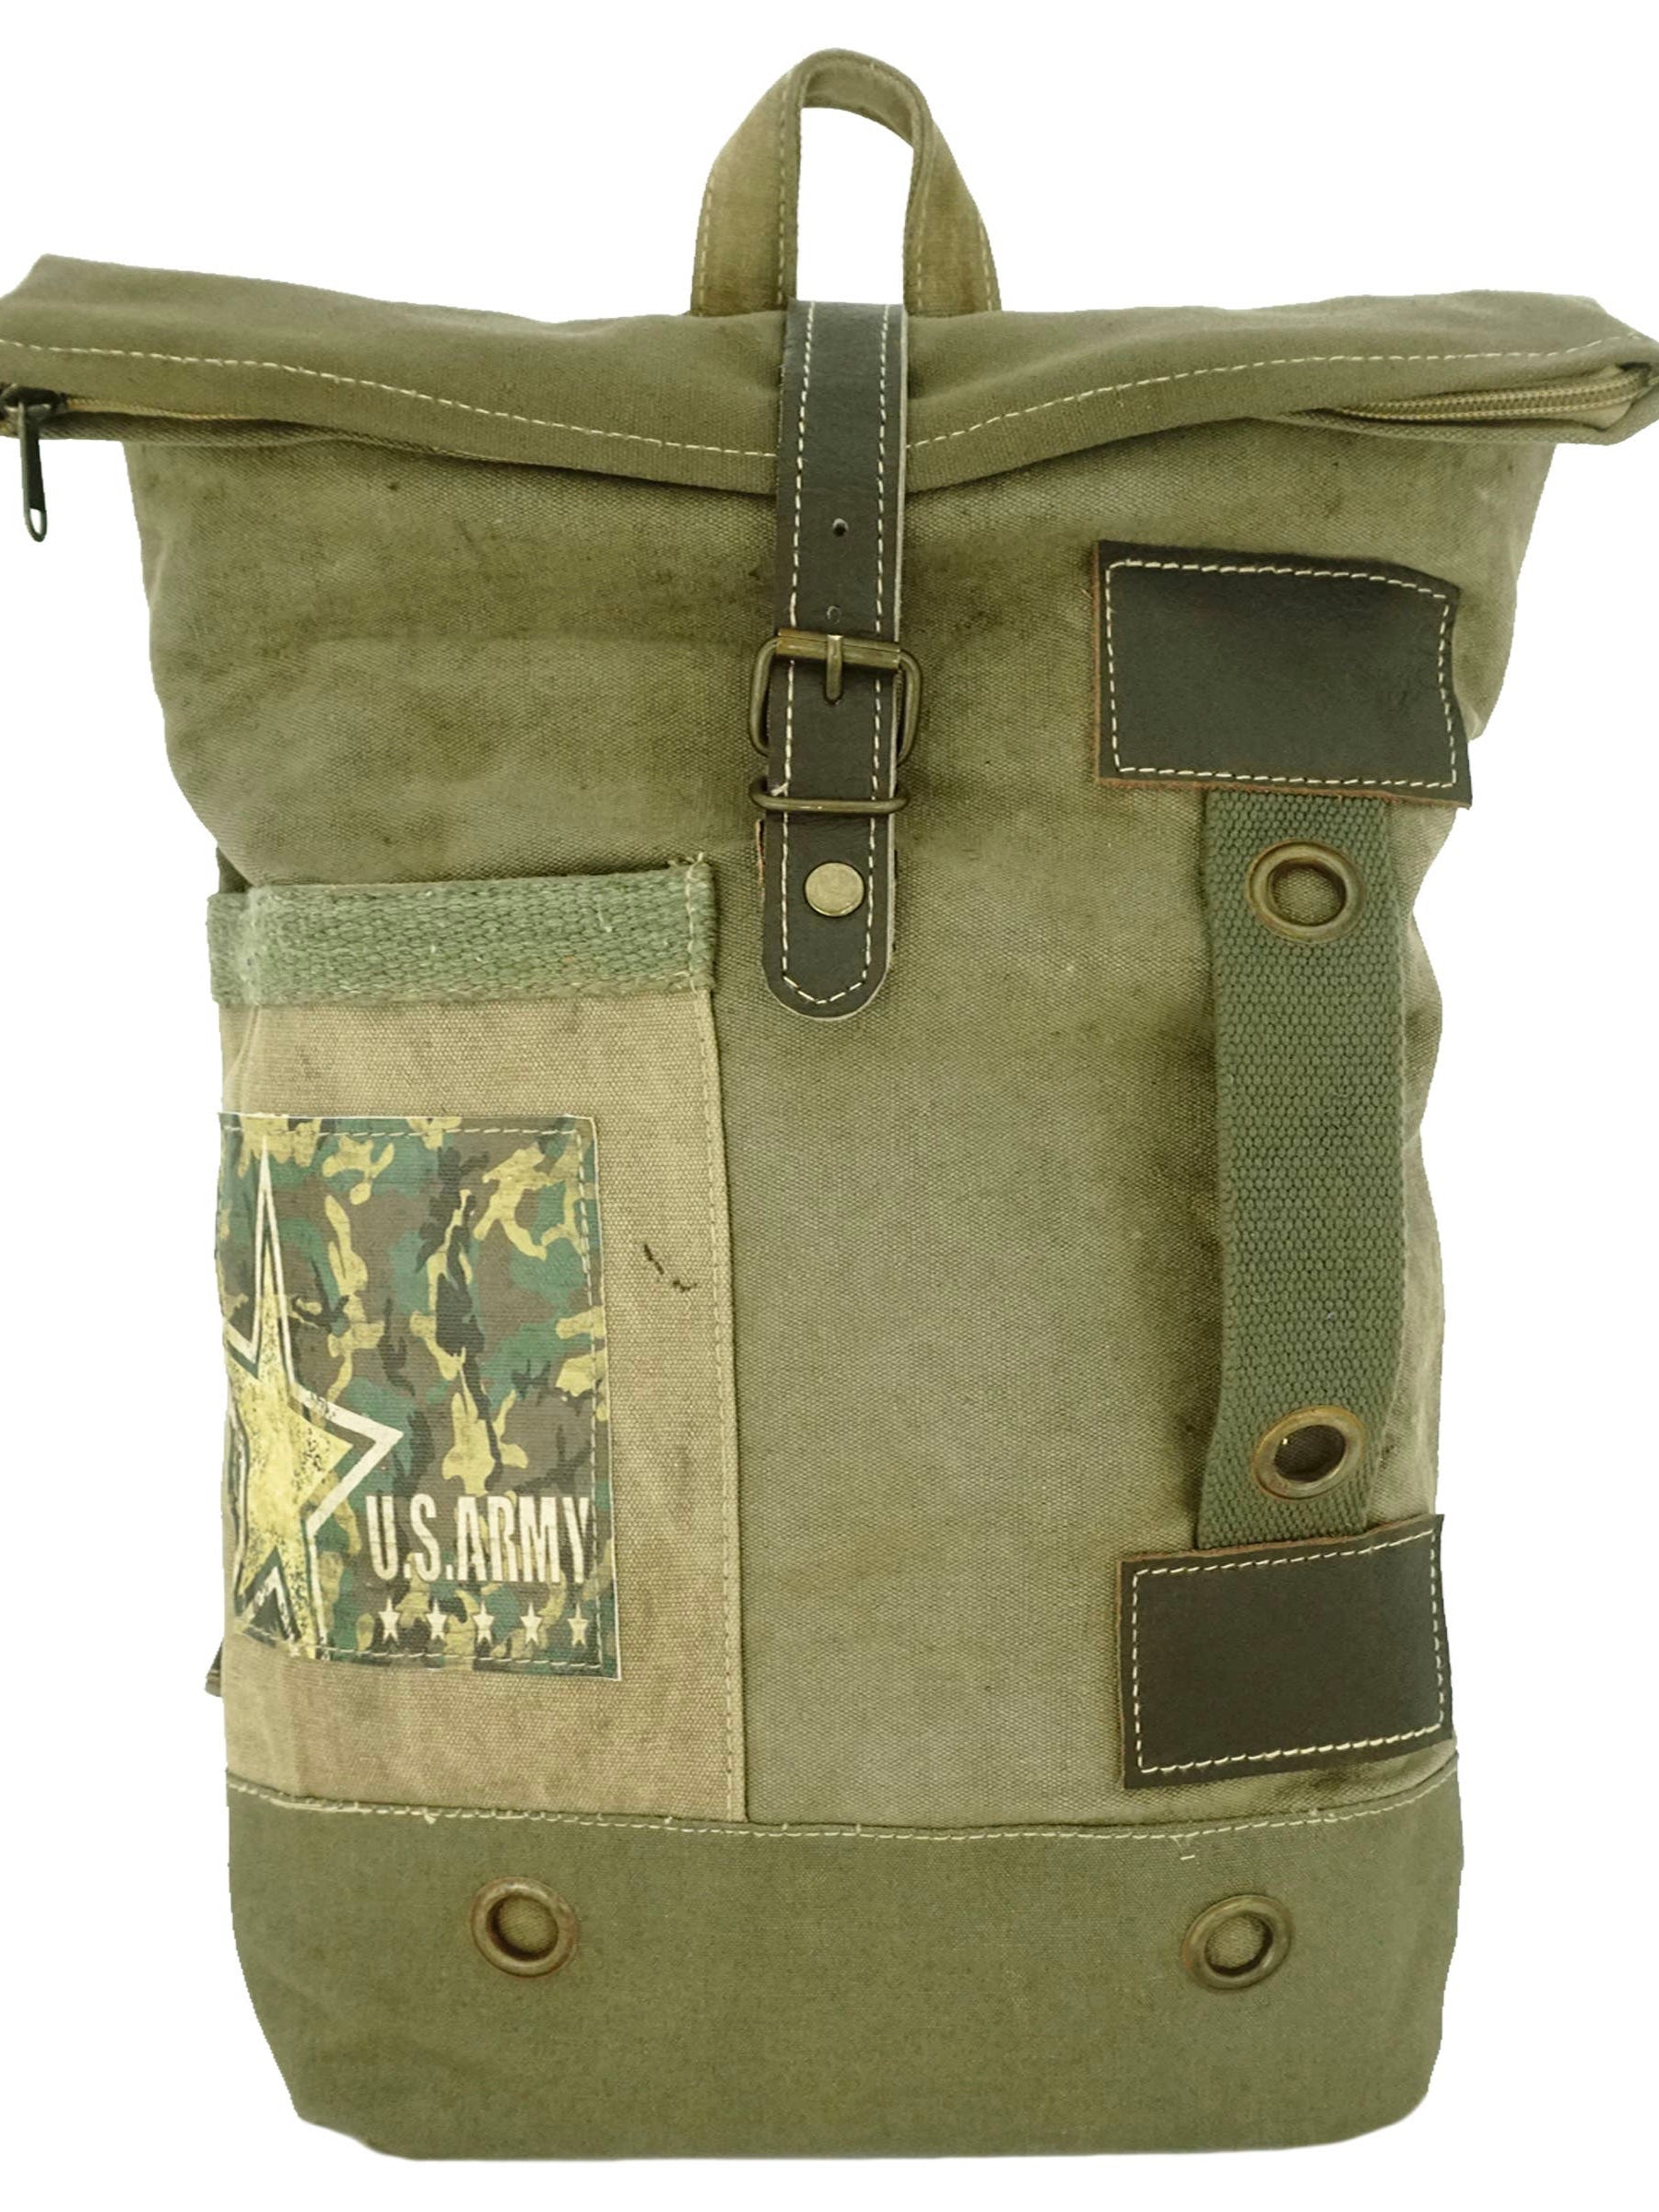 Recycled Military Tent Backpack - US ARMY